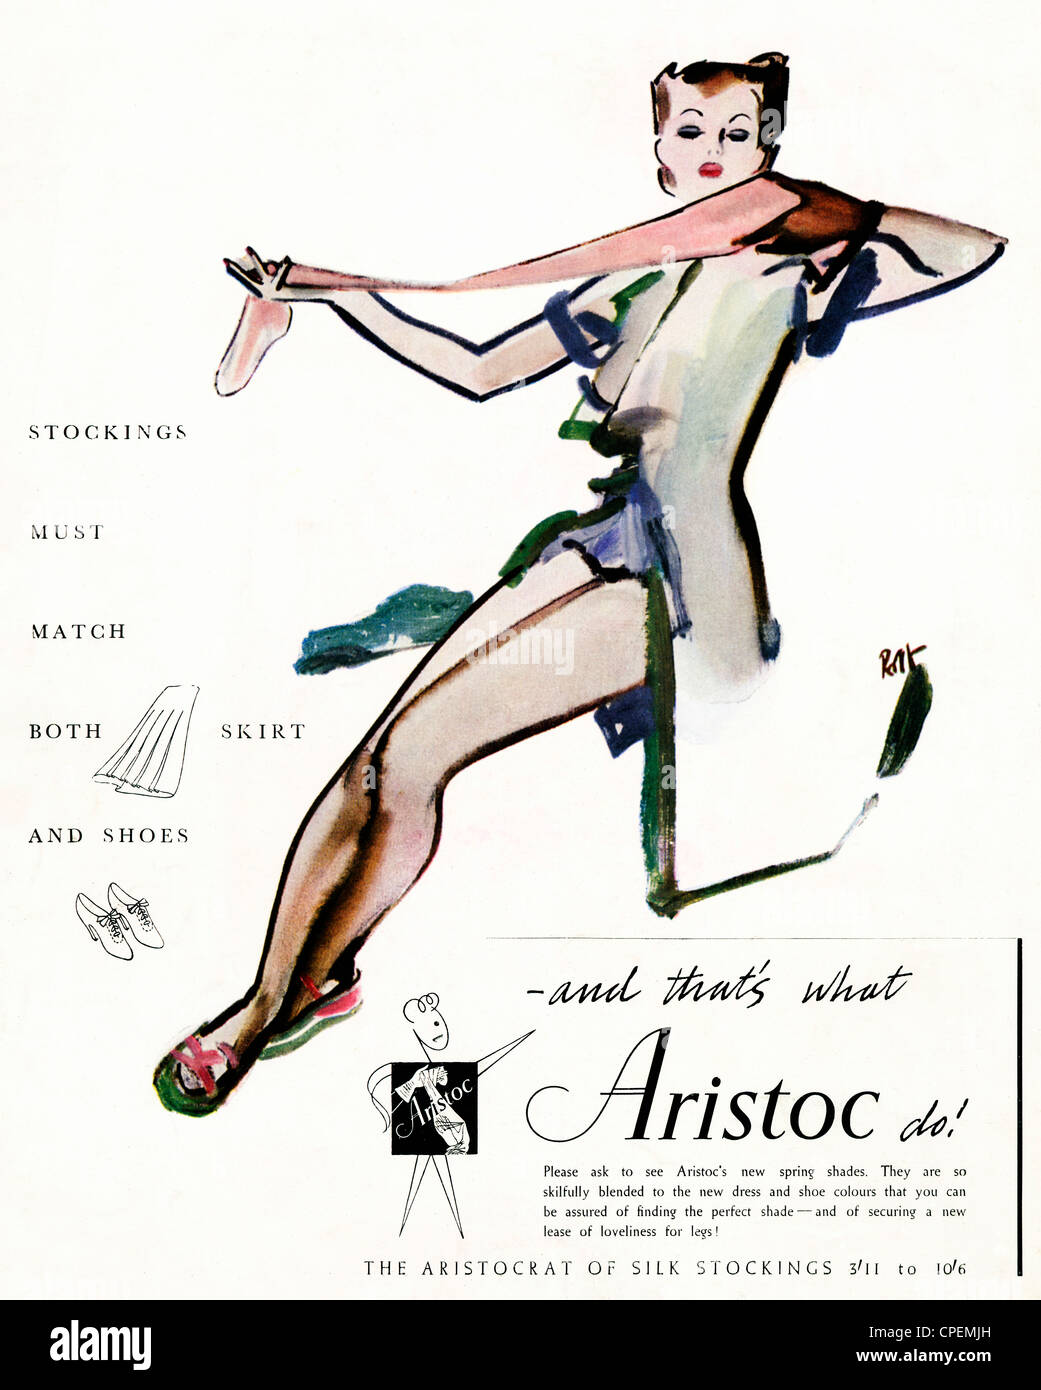 Aristoc Stockings, 1939 advert for the fashionable hosiery, The Aristocrat  of Silk Stockings Stock Photo - Alamy